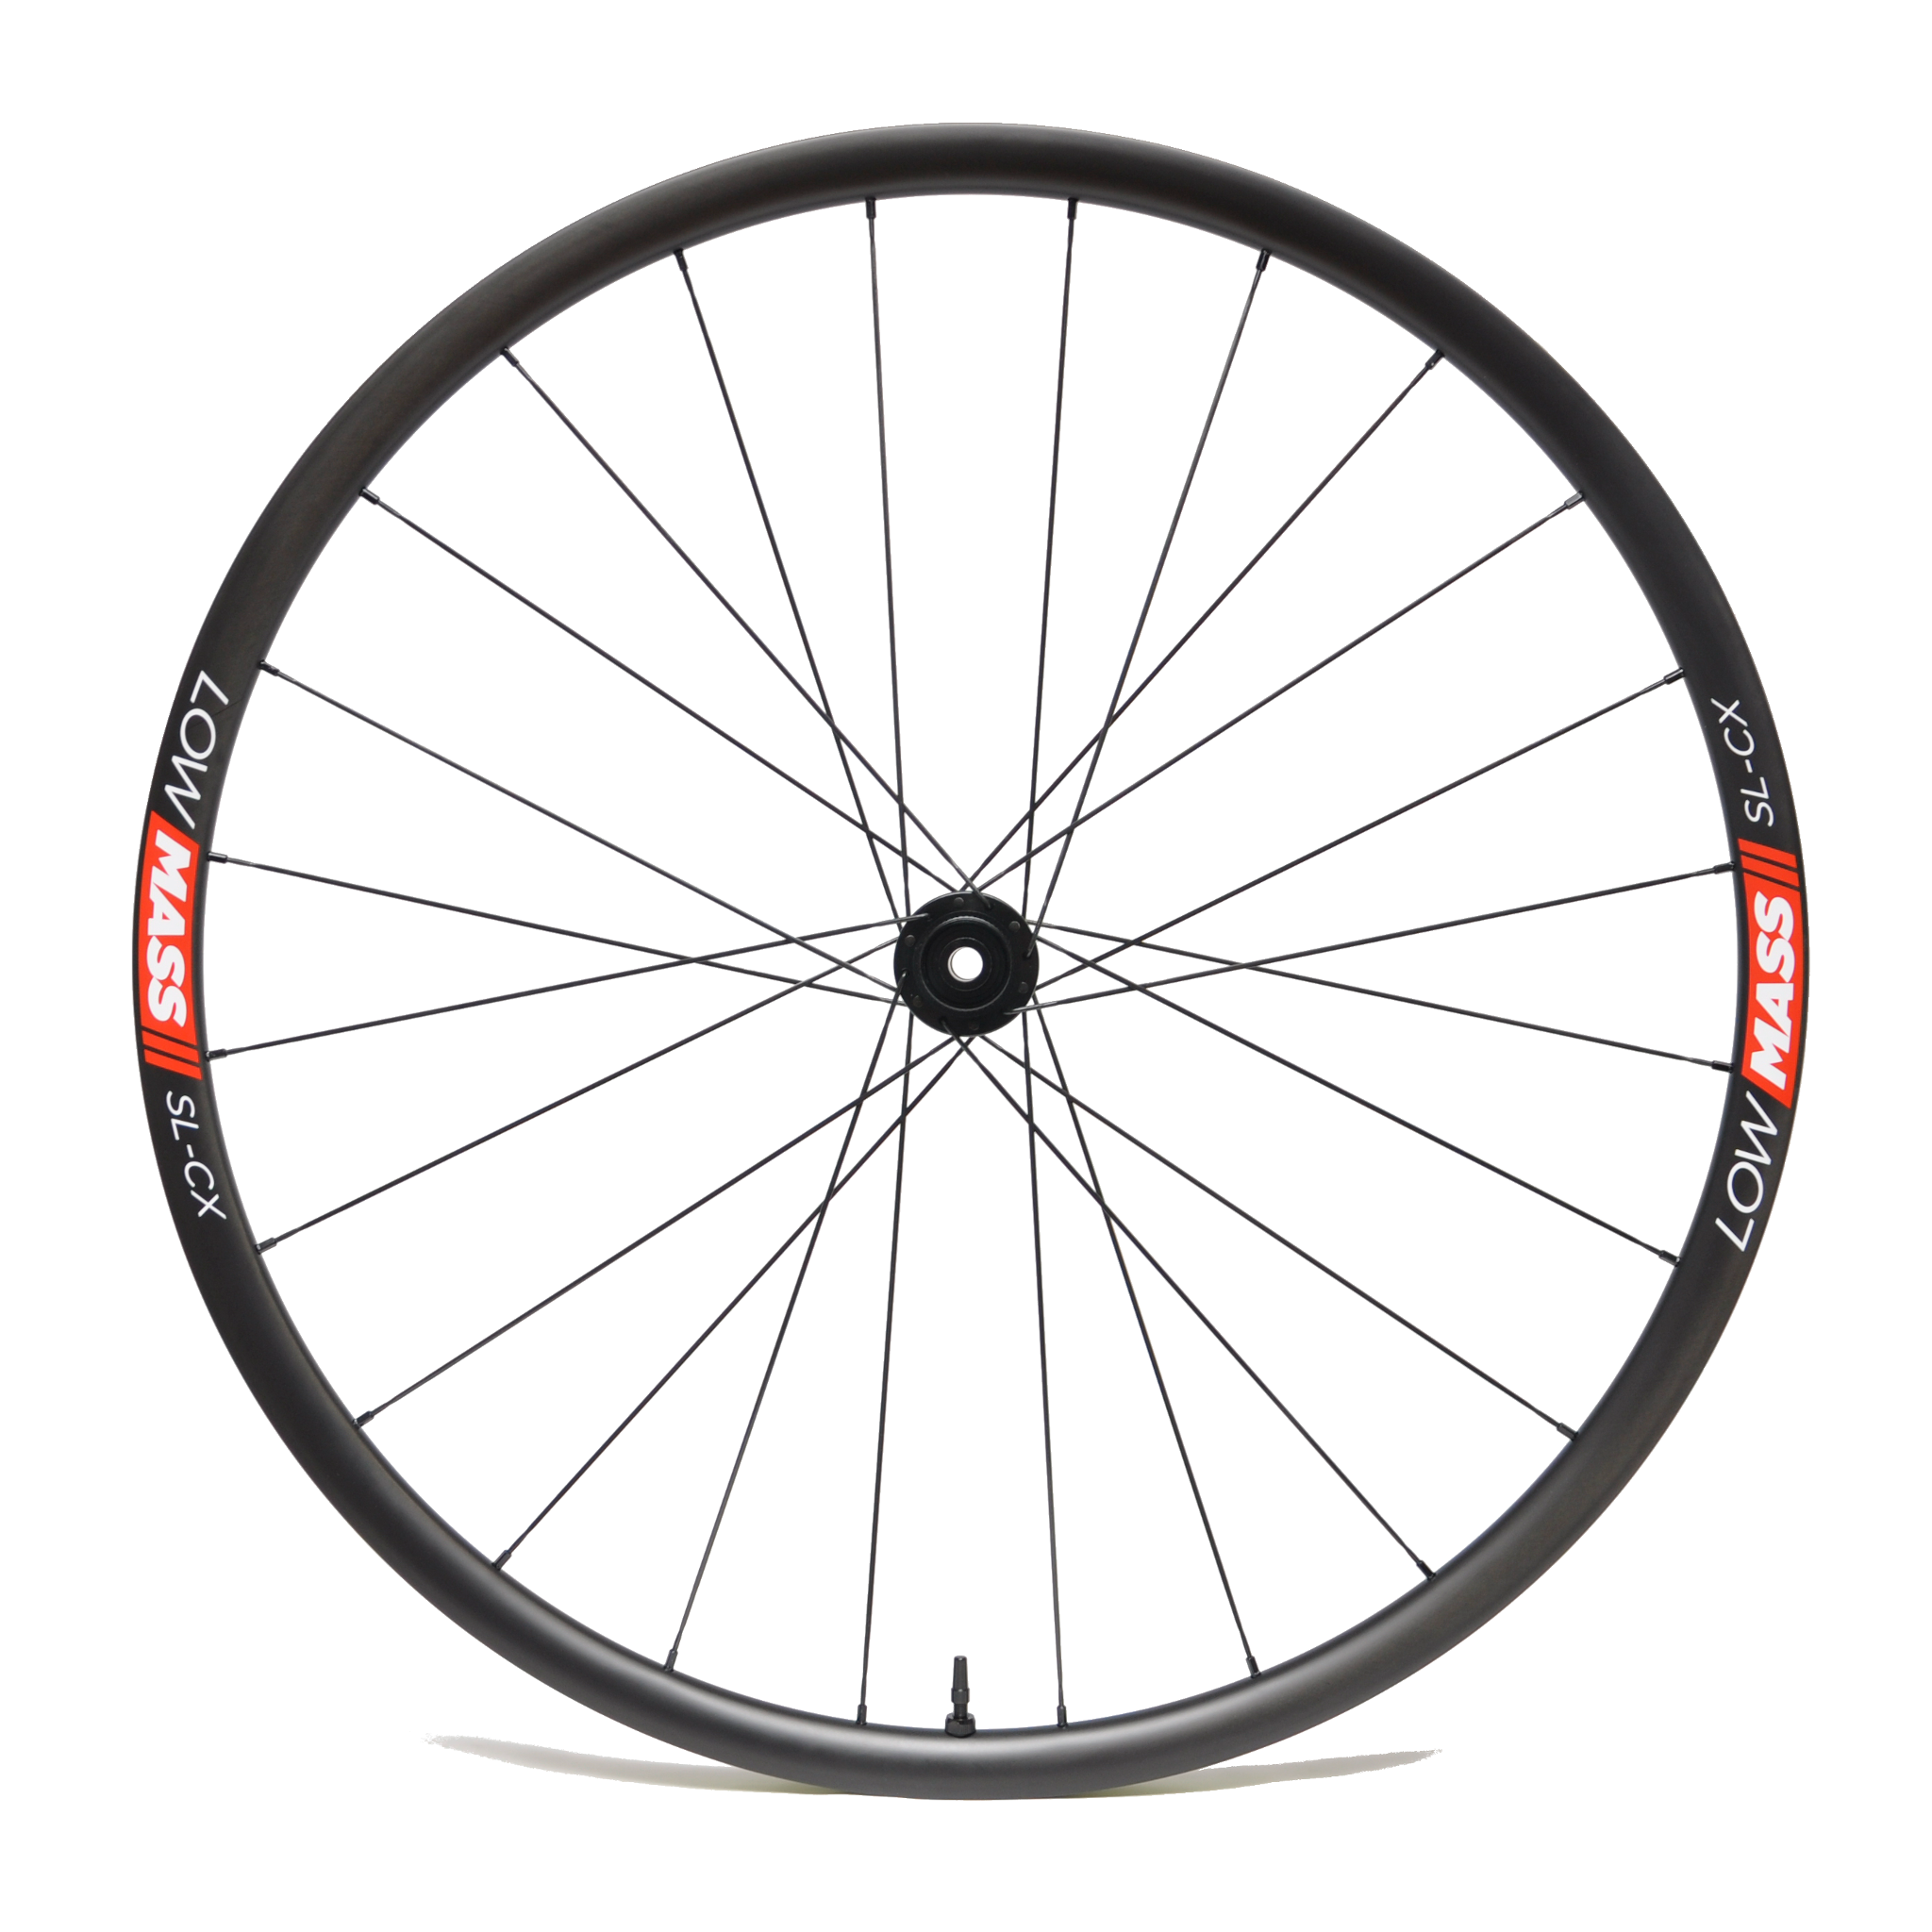 LOWMASS SL-CX Carbon Tubeless Disc Wheelset Package